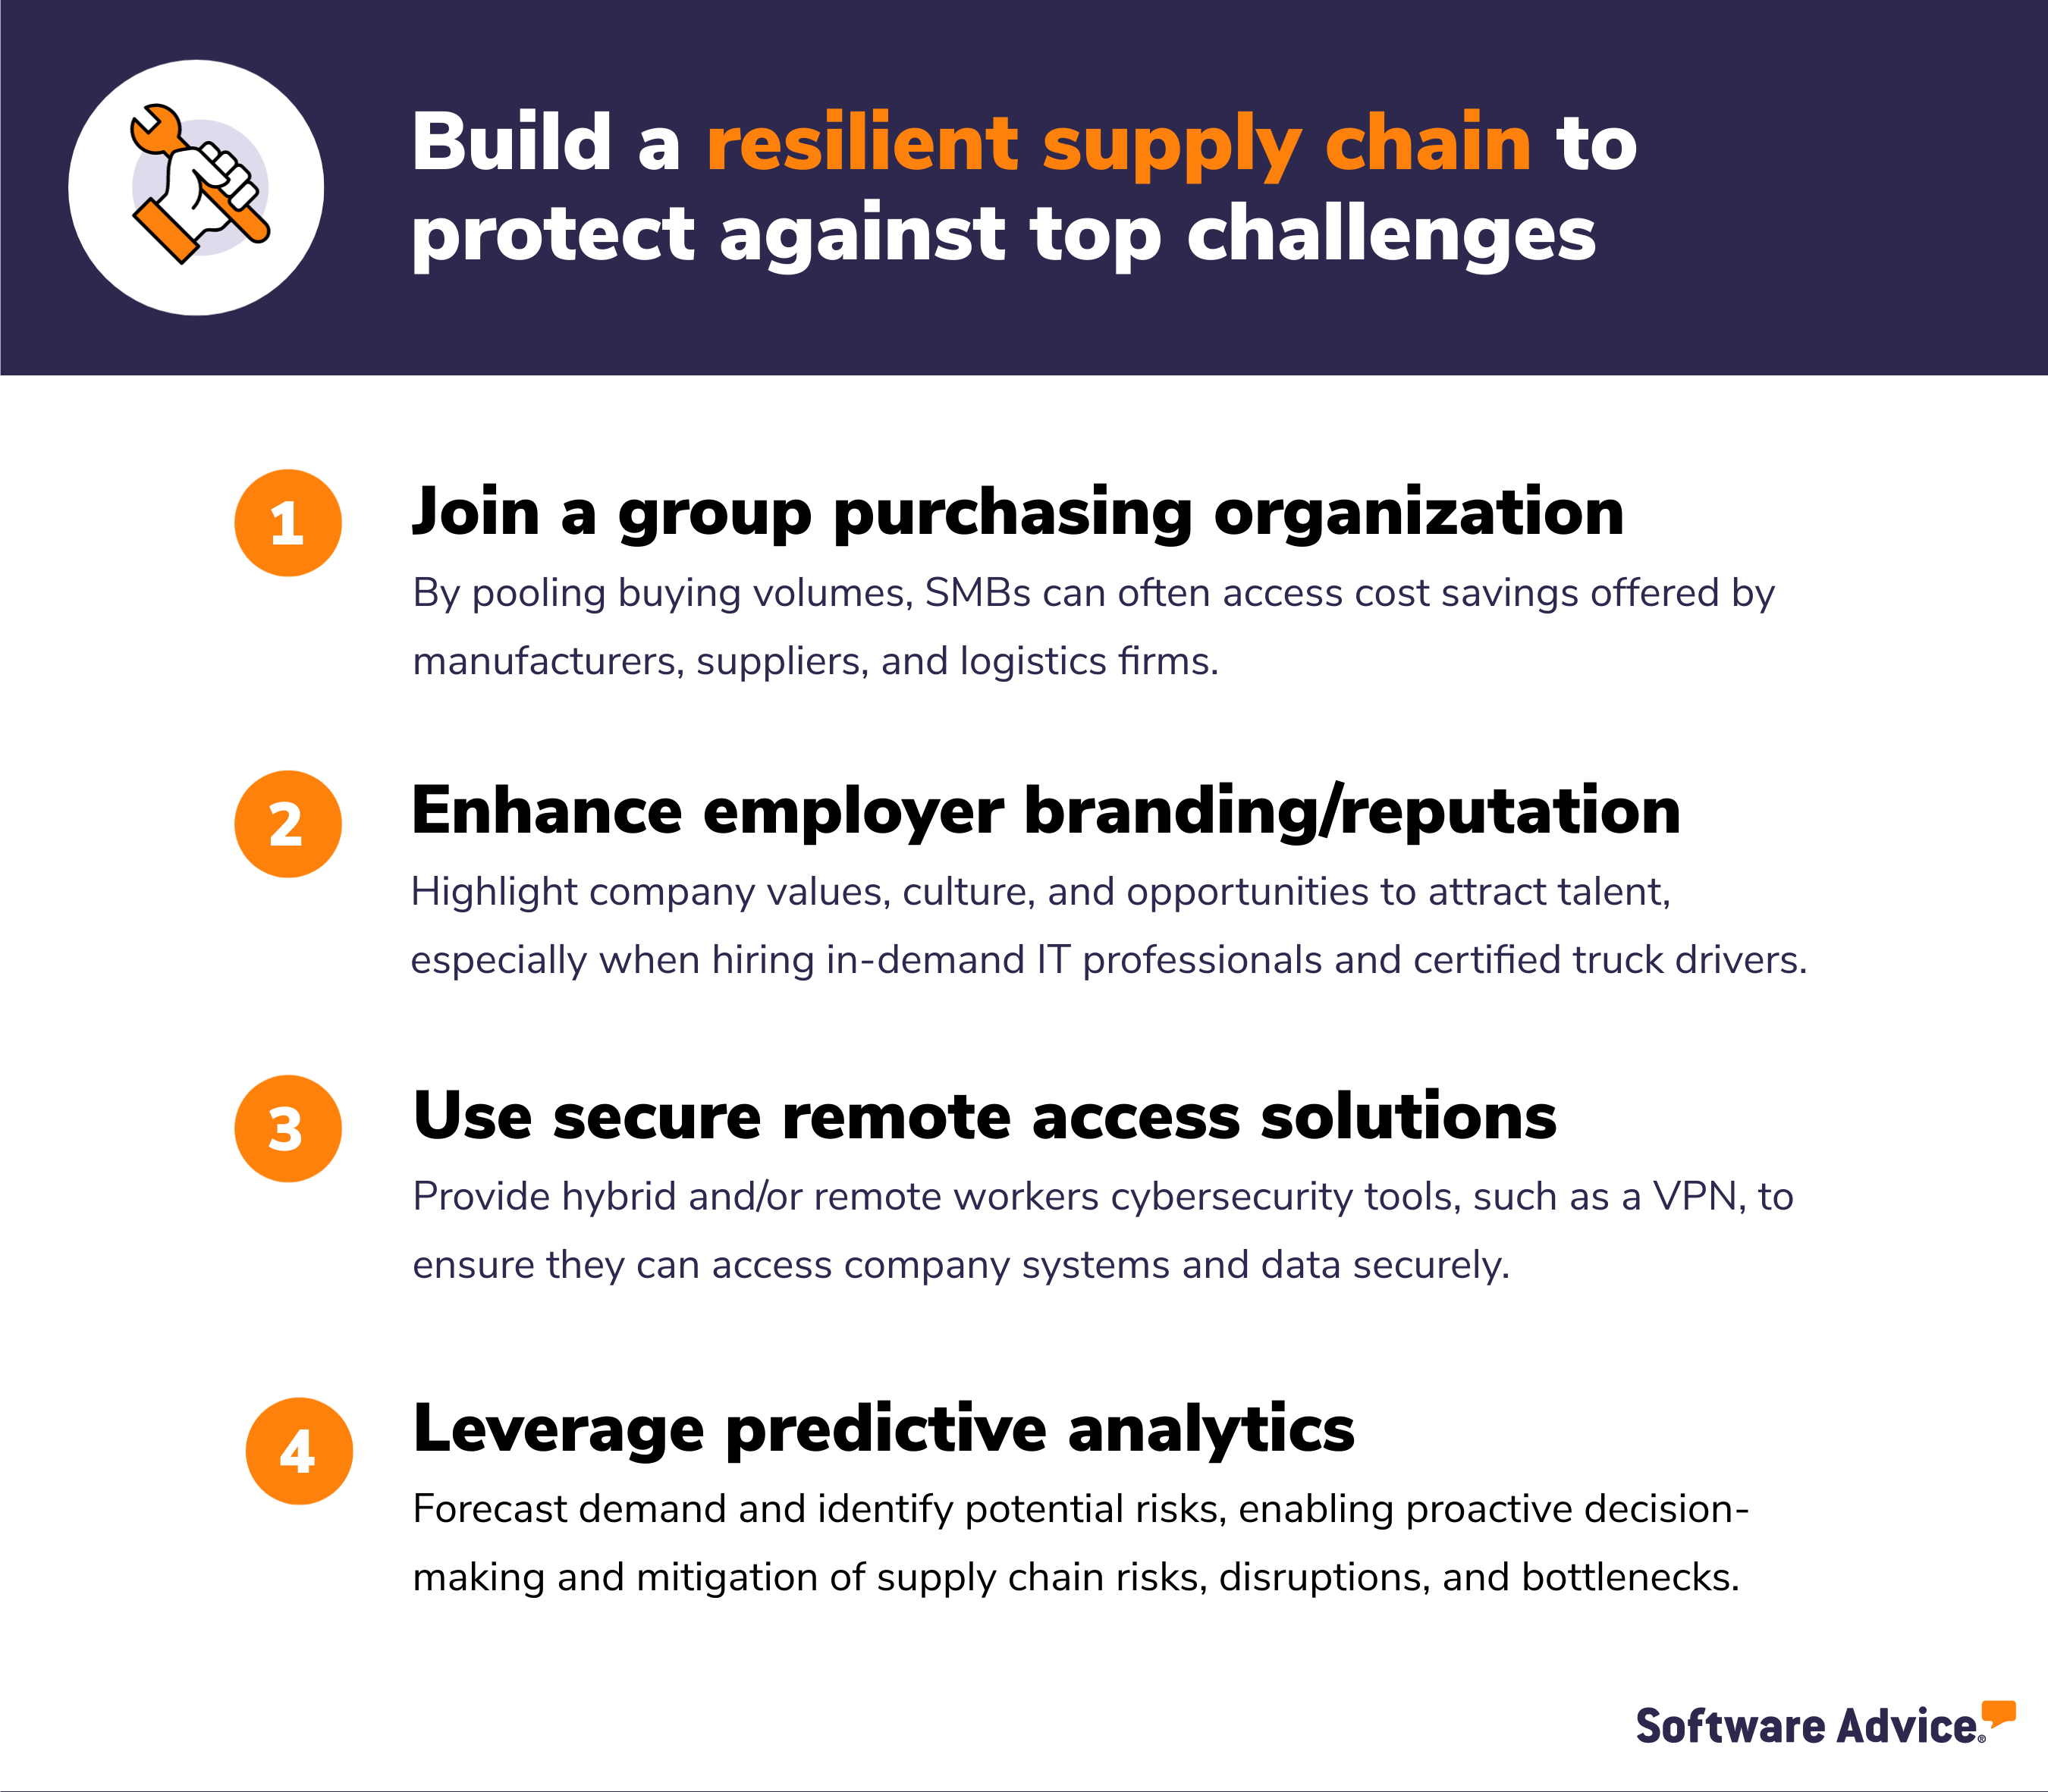 Build a resilient supply chain to protect against top challenges.